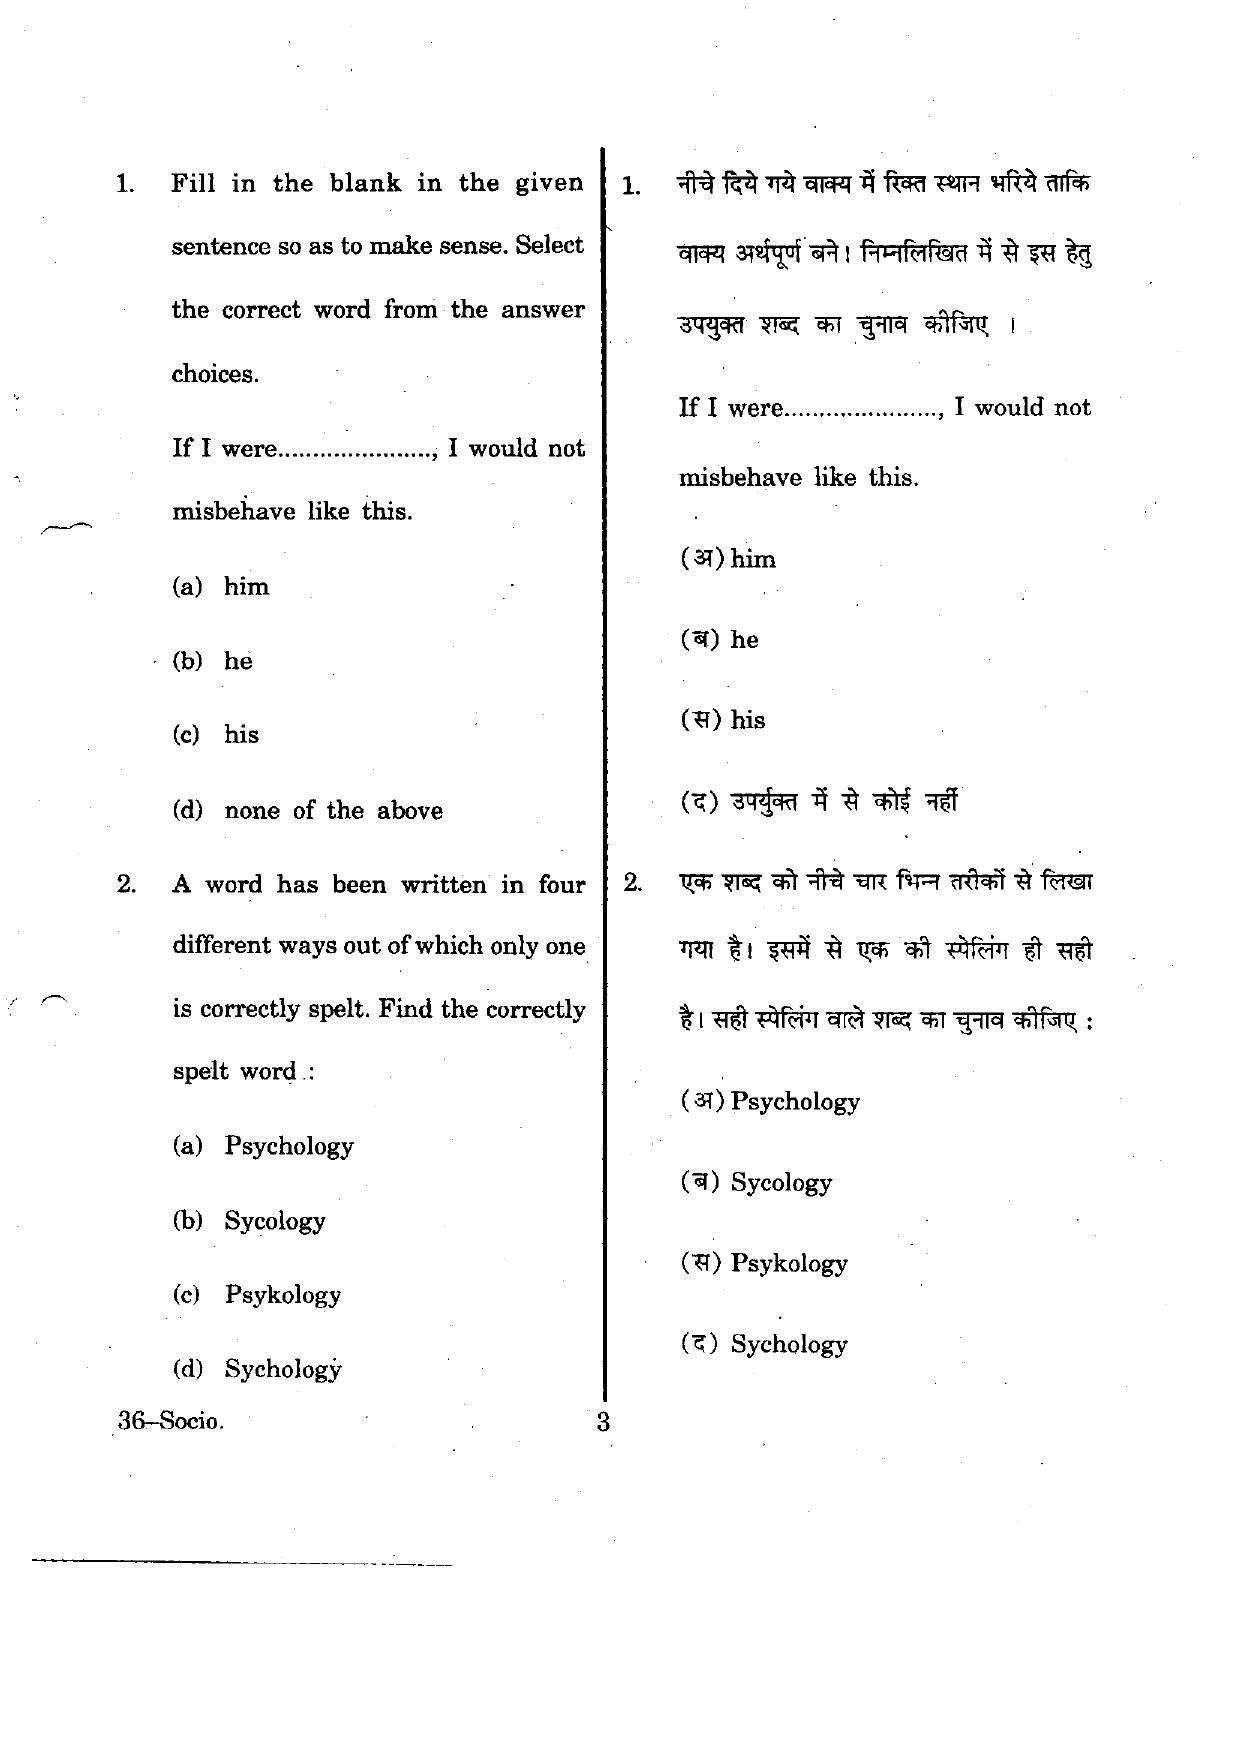 URATPG Sociology 2012 Question Paper - Page 3